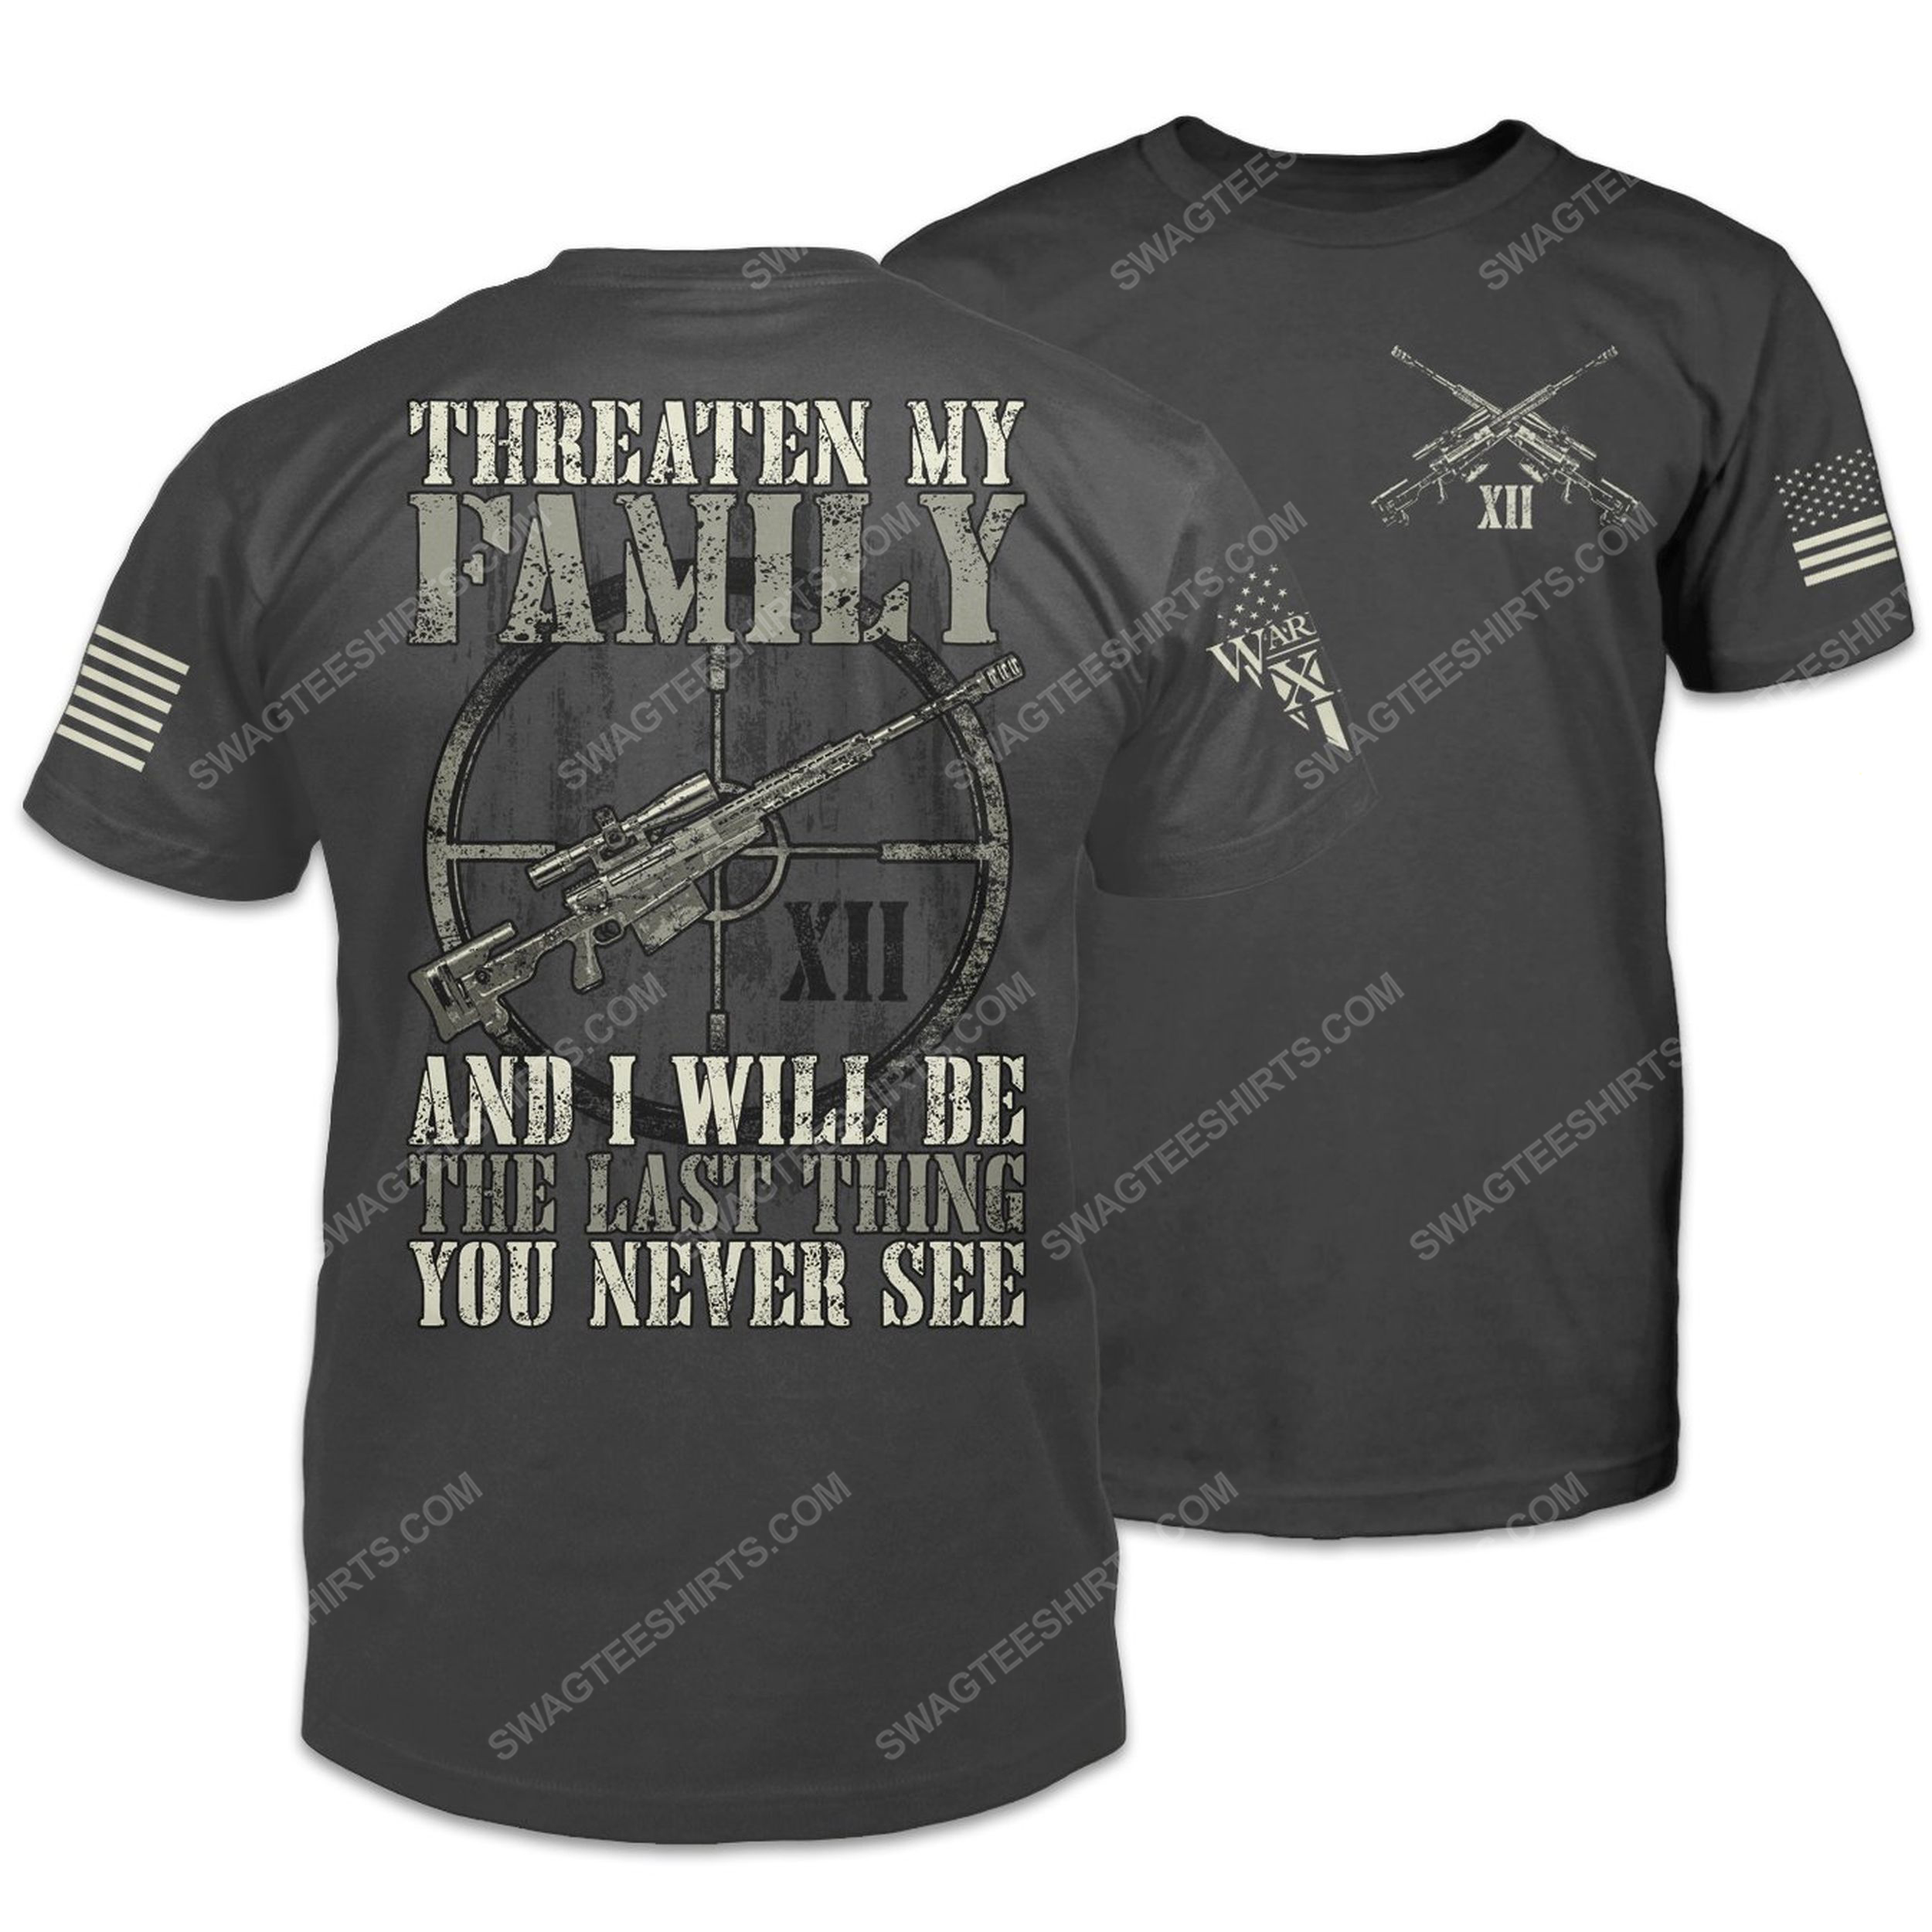 Threaten my family amd i will be the last thing you never see shirt 3(1)